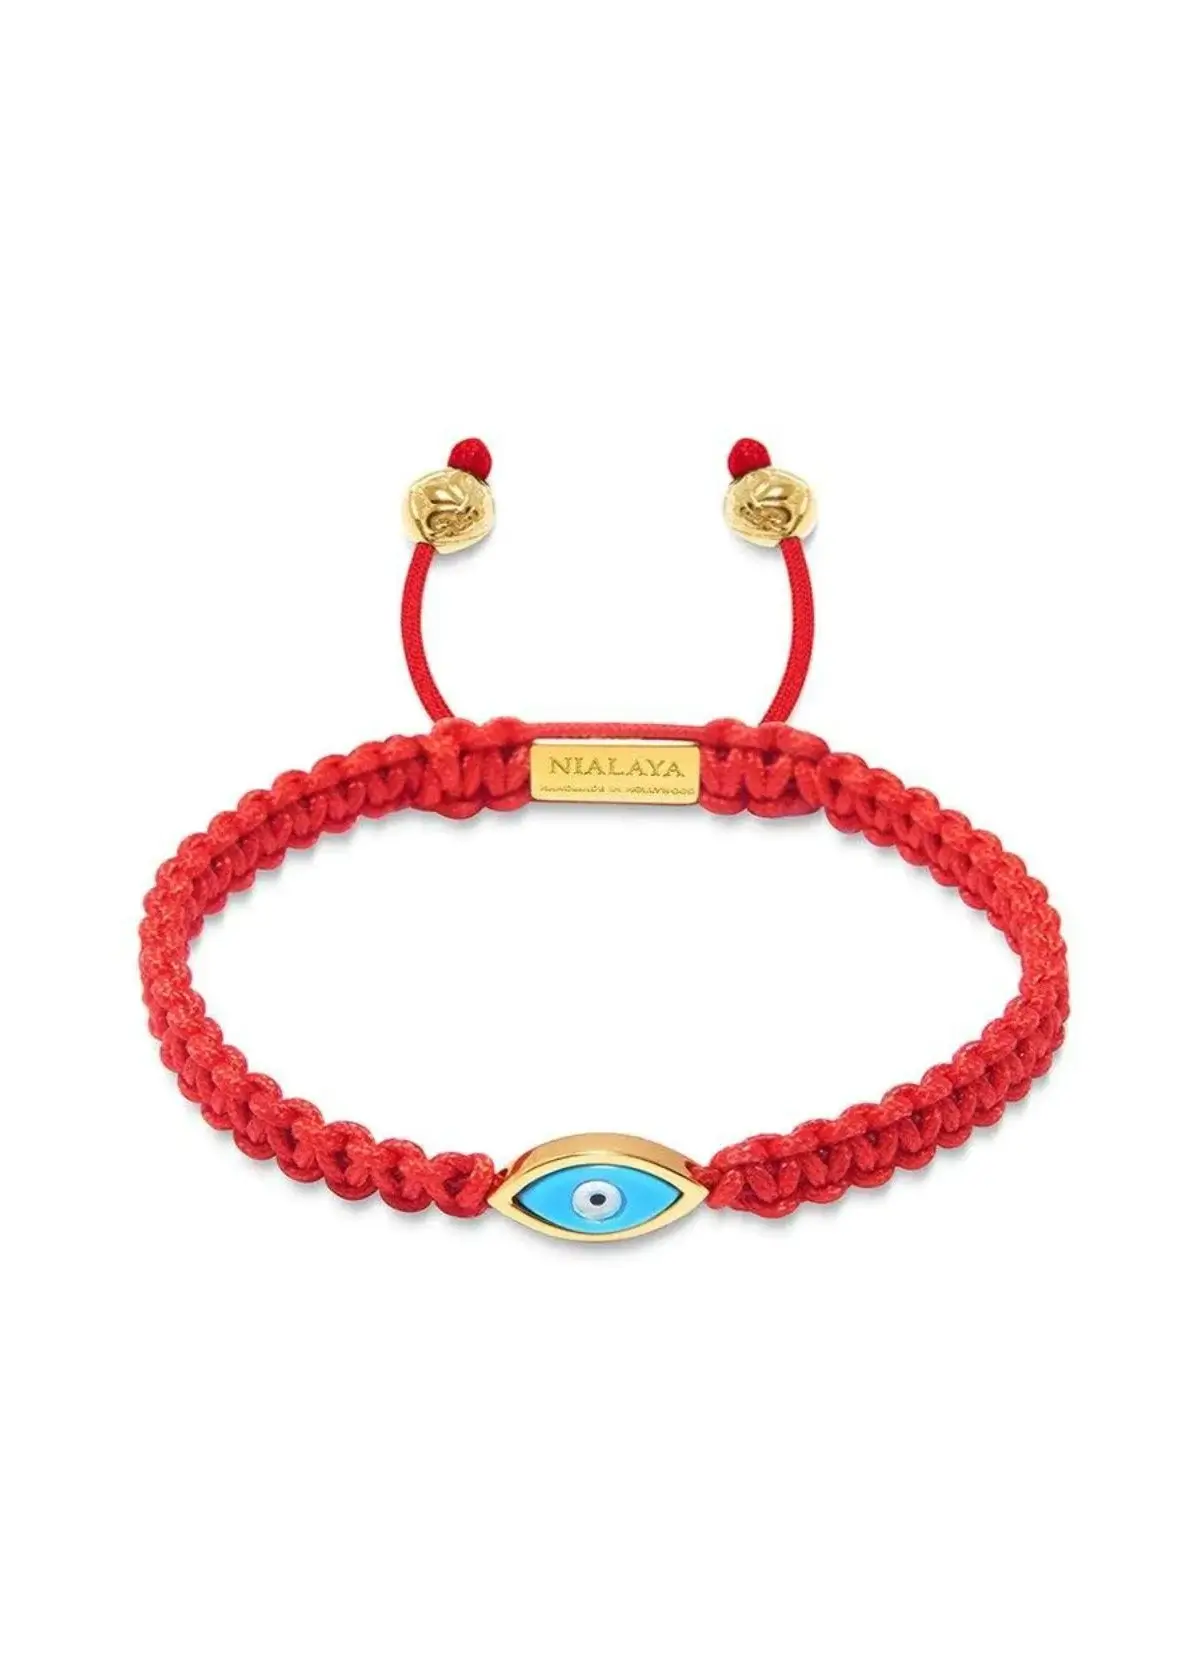 How to Choose the Right Red Eye Bracelet?